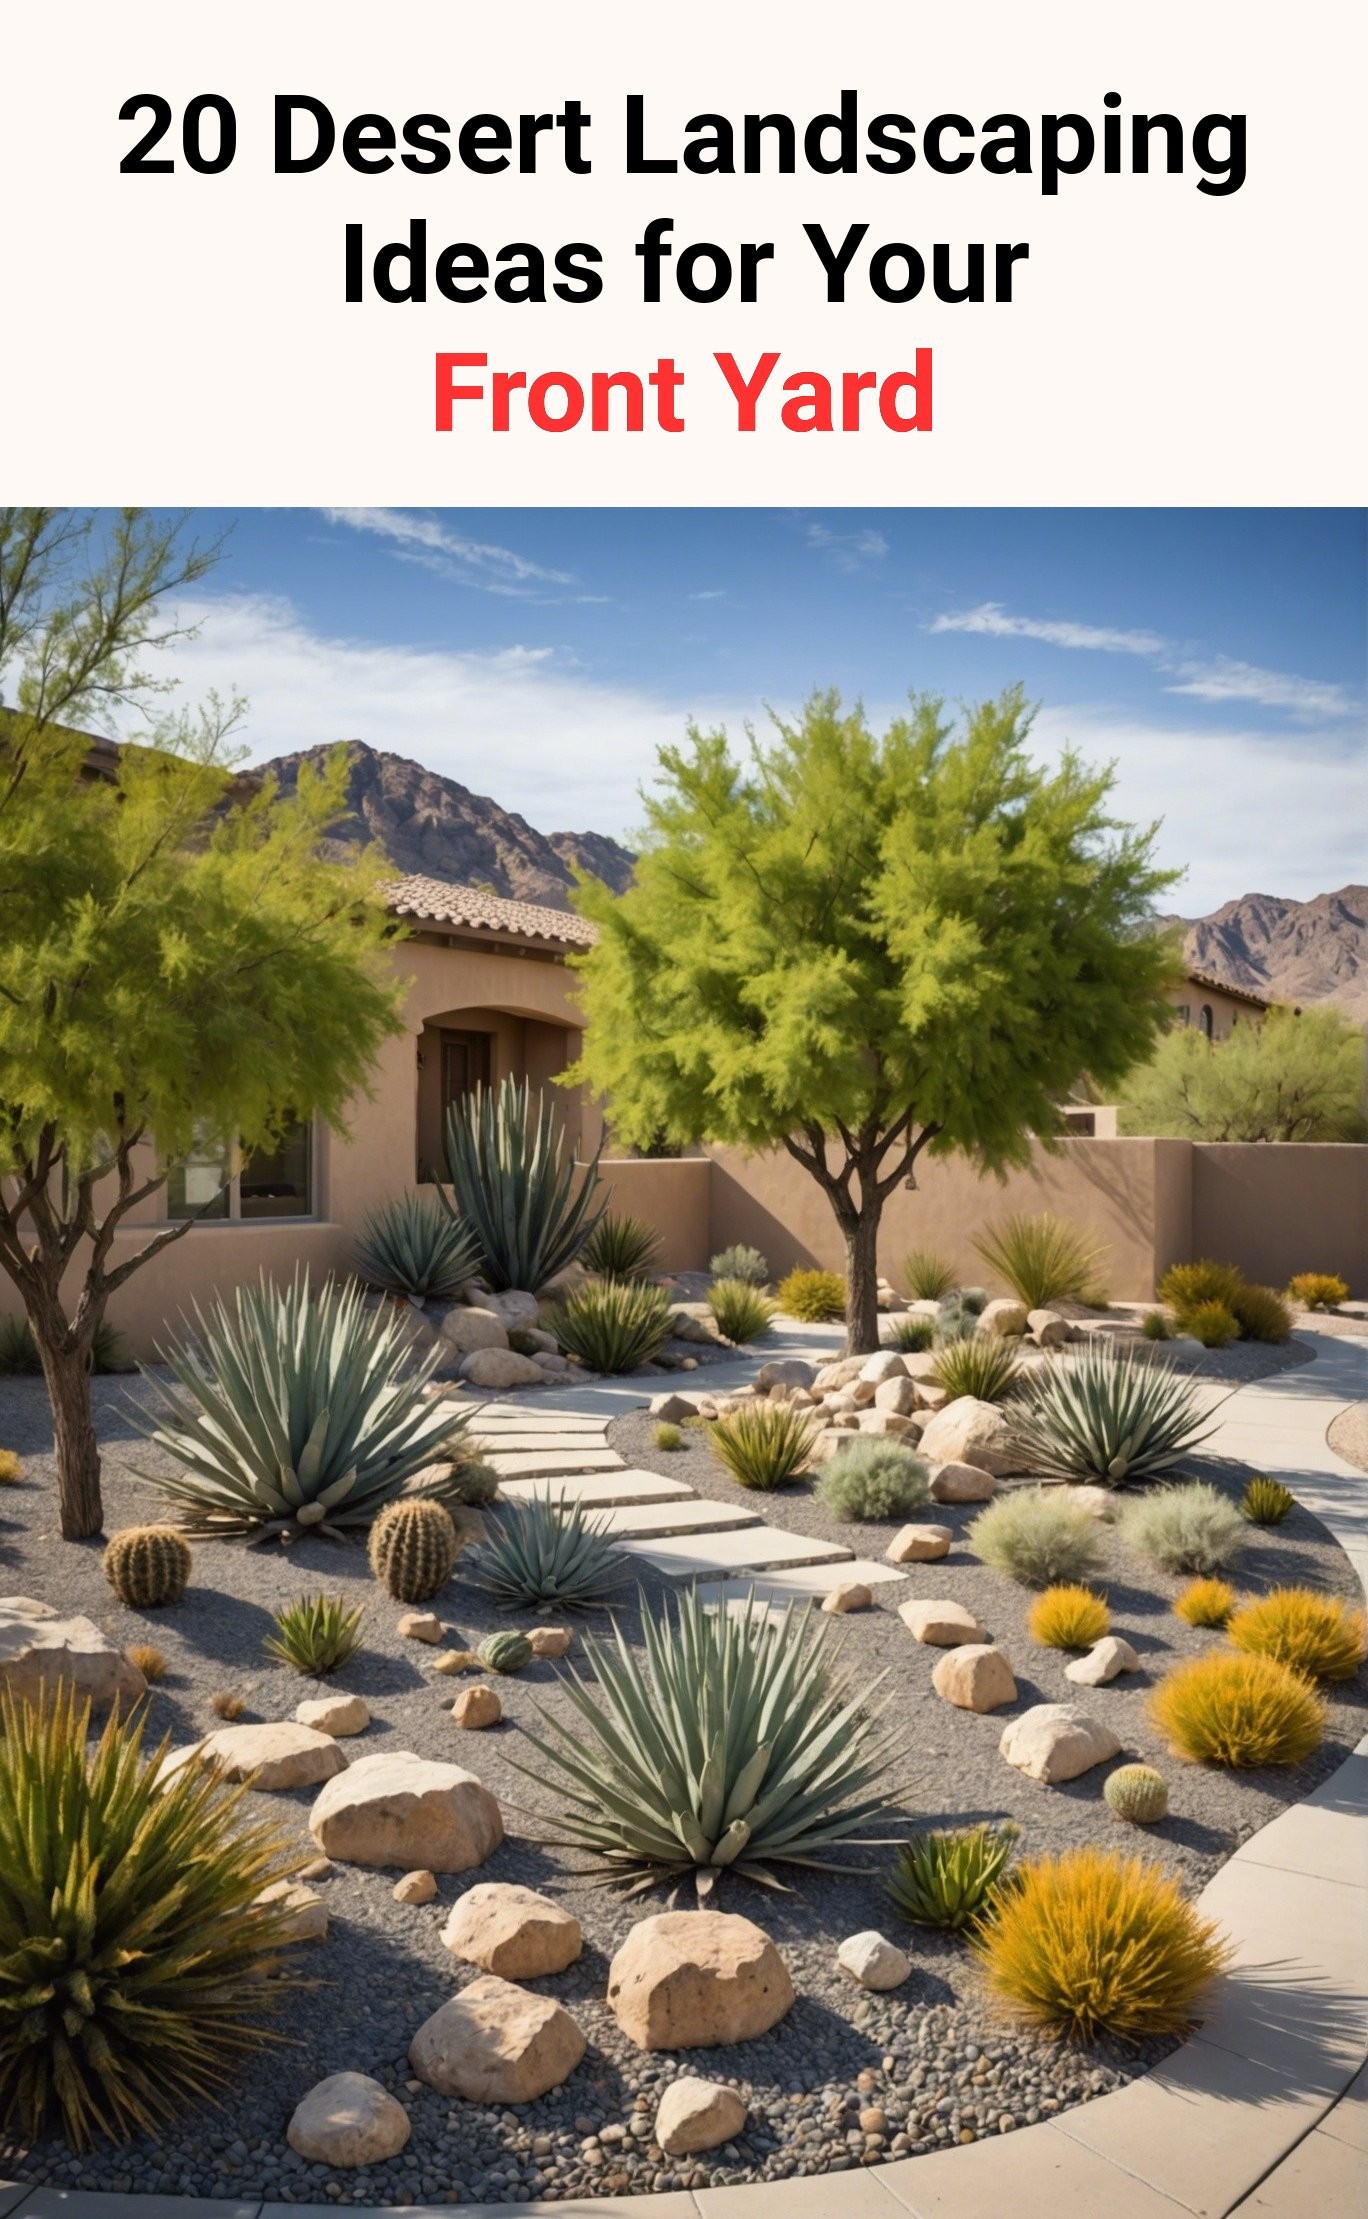 20 Desert Landscaping Ideas for Your Front Yard